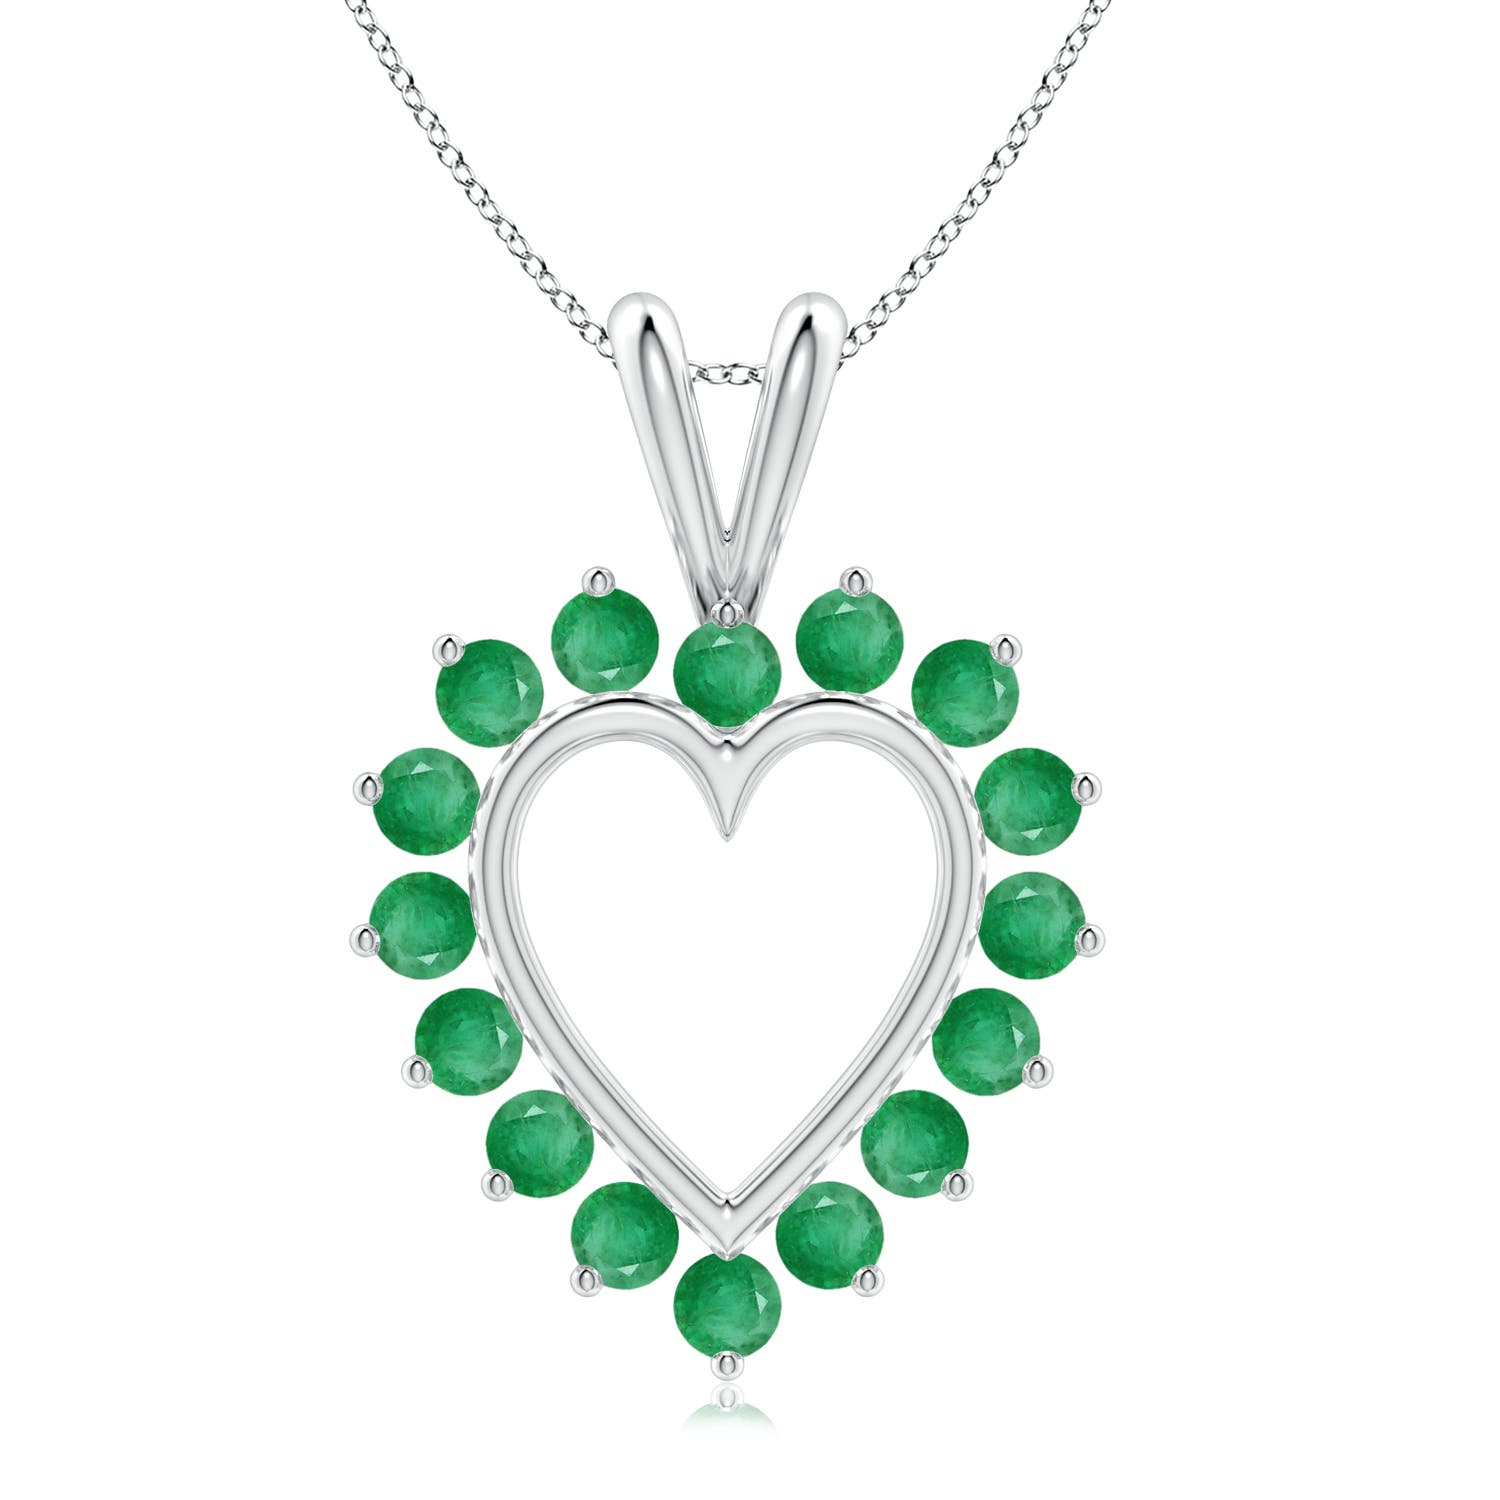 A - Emerald / 0.72 CT / 14 KT White Gold